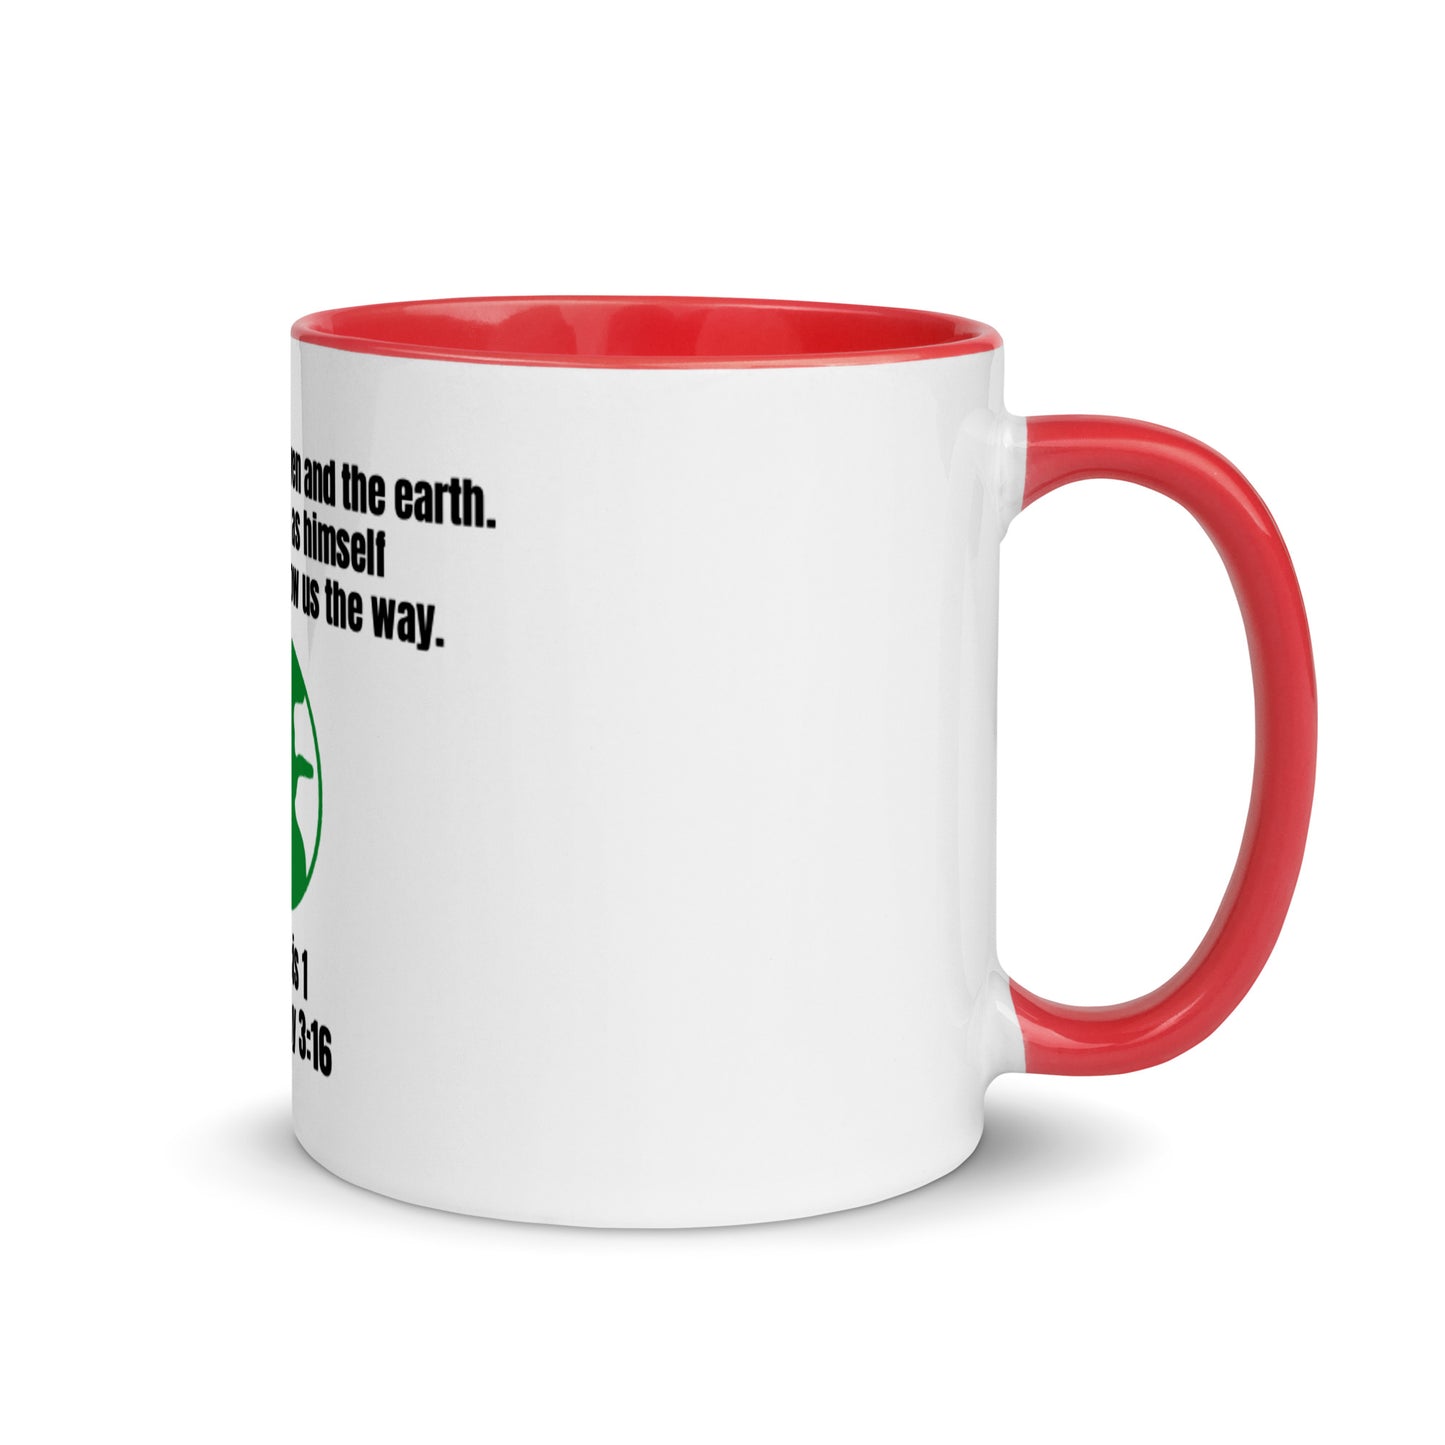 God Created The Heaven And The Earth White Ceramic Mug with Color Inside